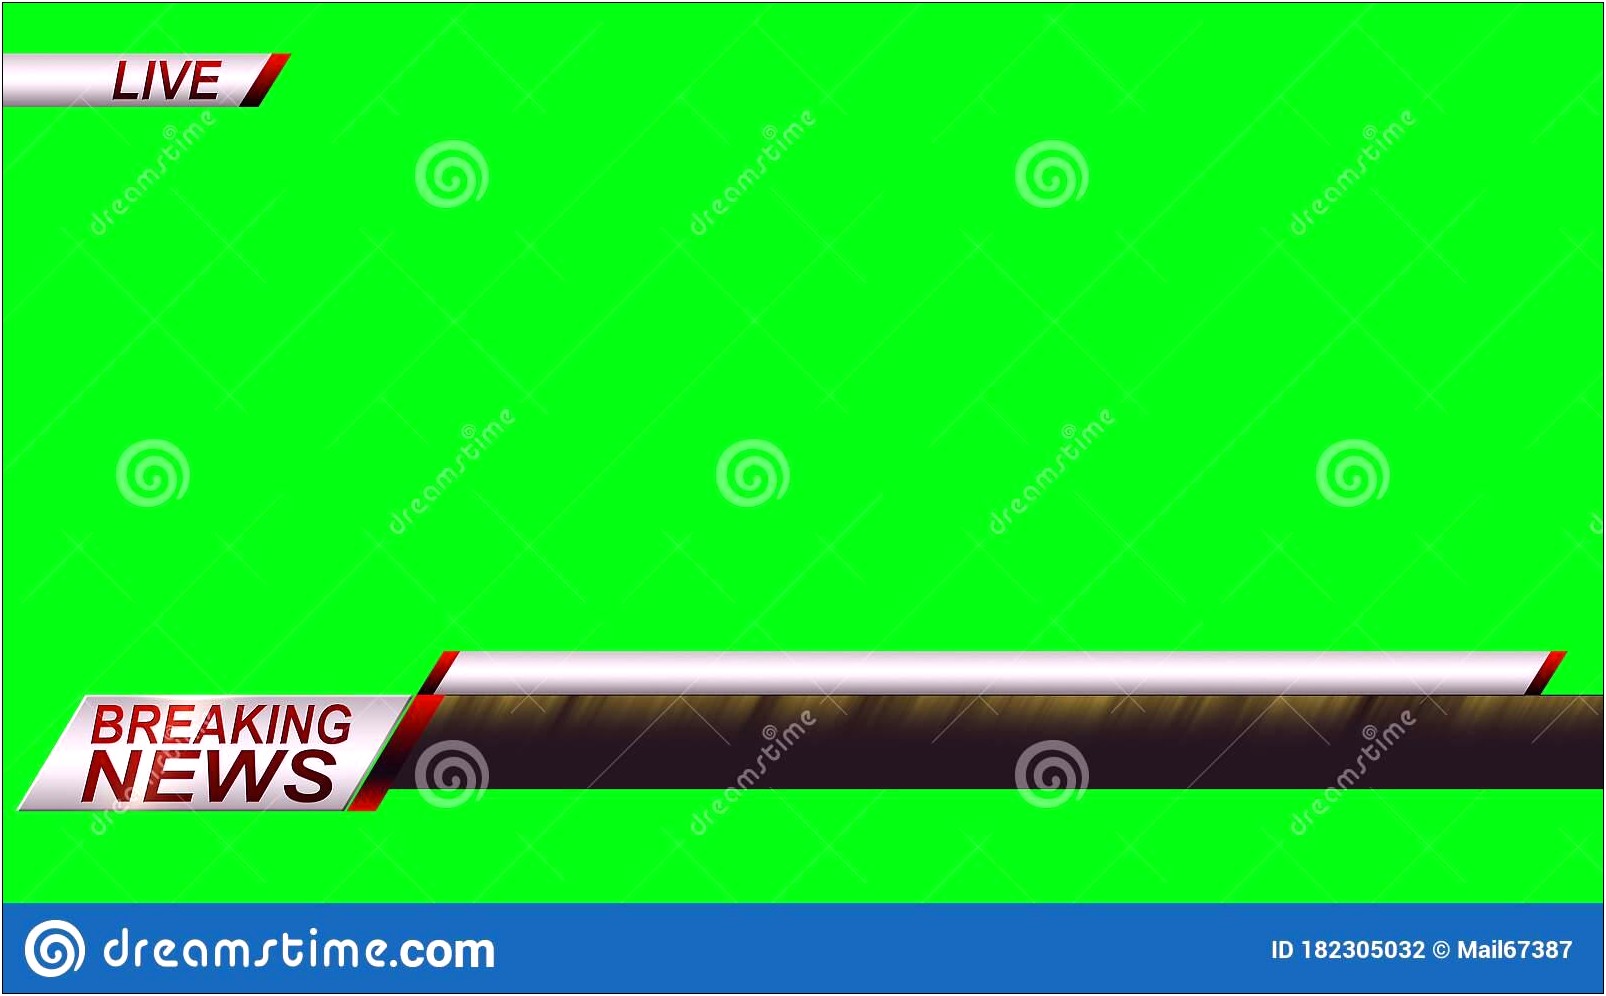 Royalty Free Breaking News Template Background Images